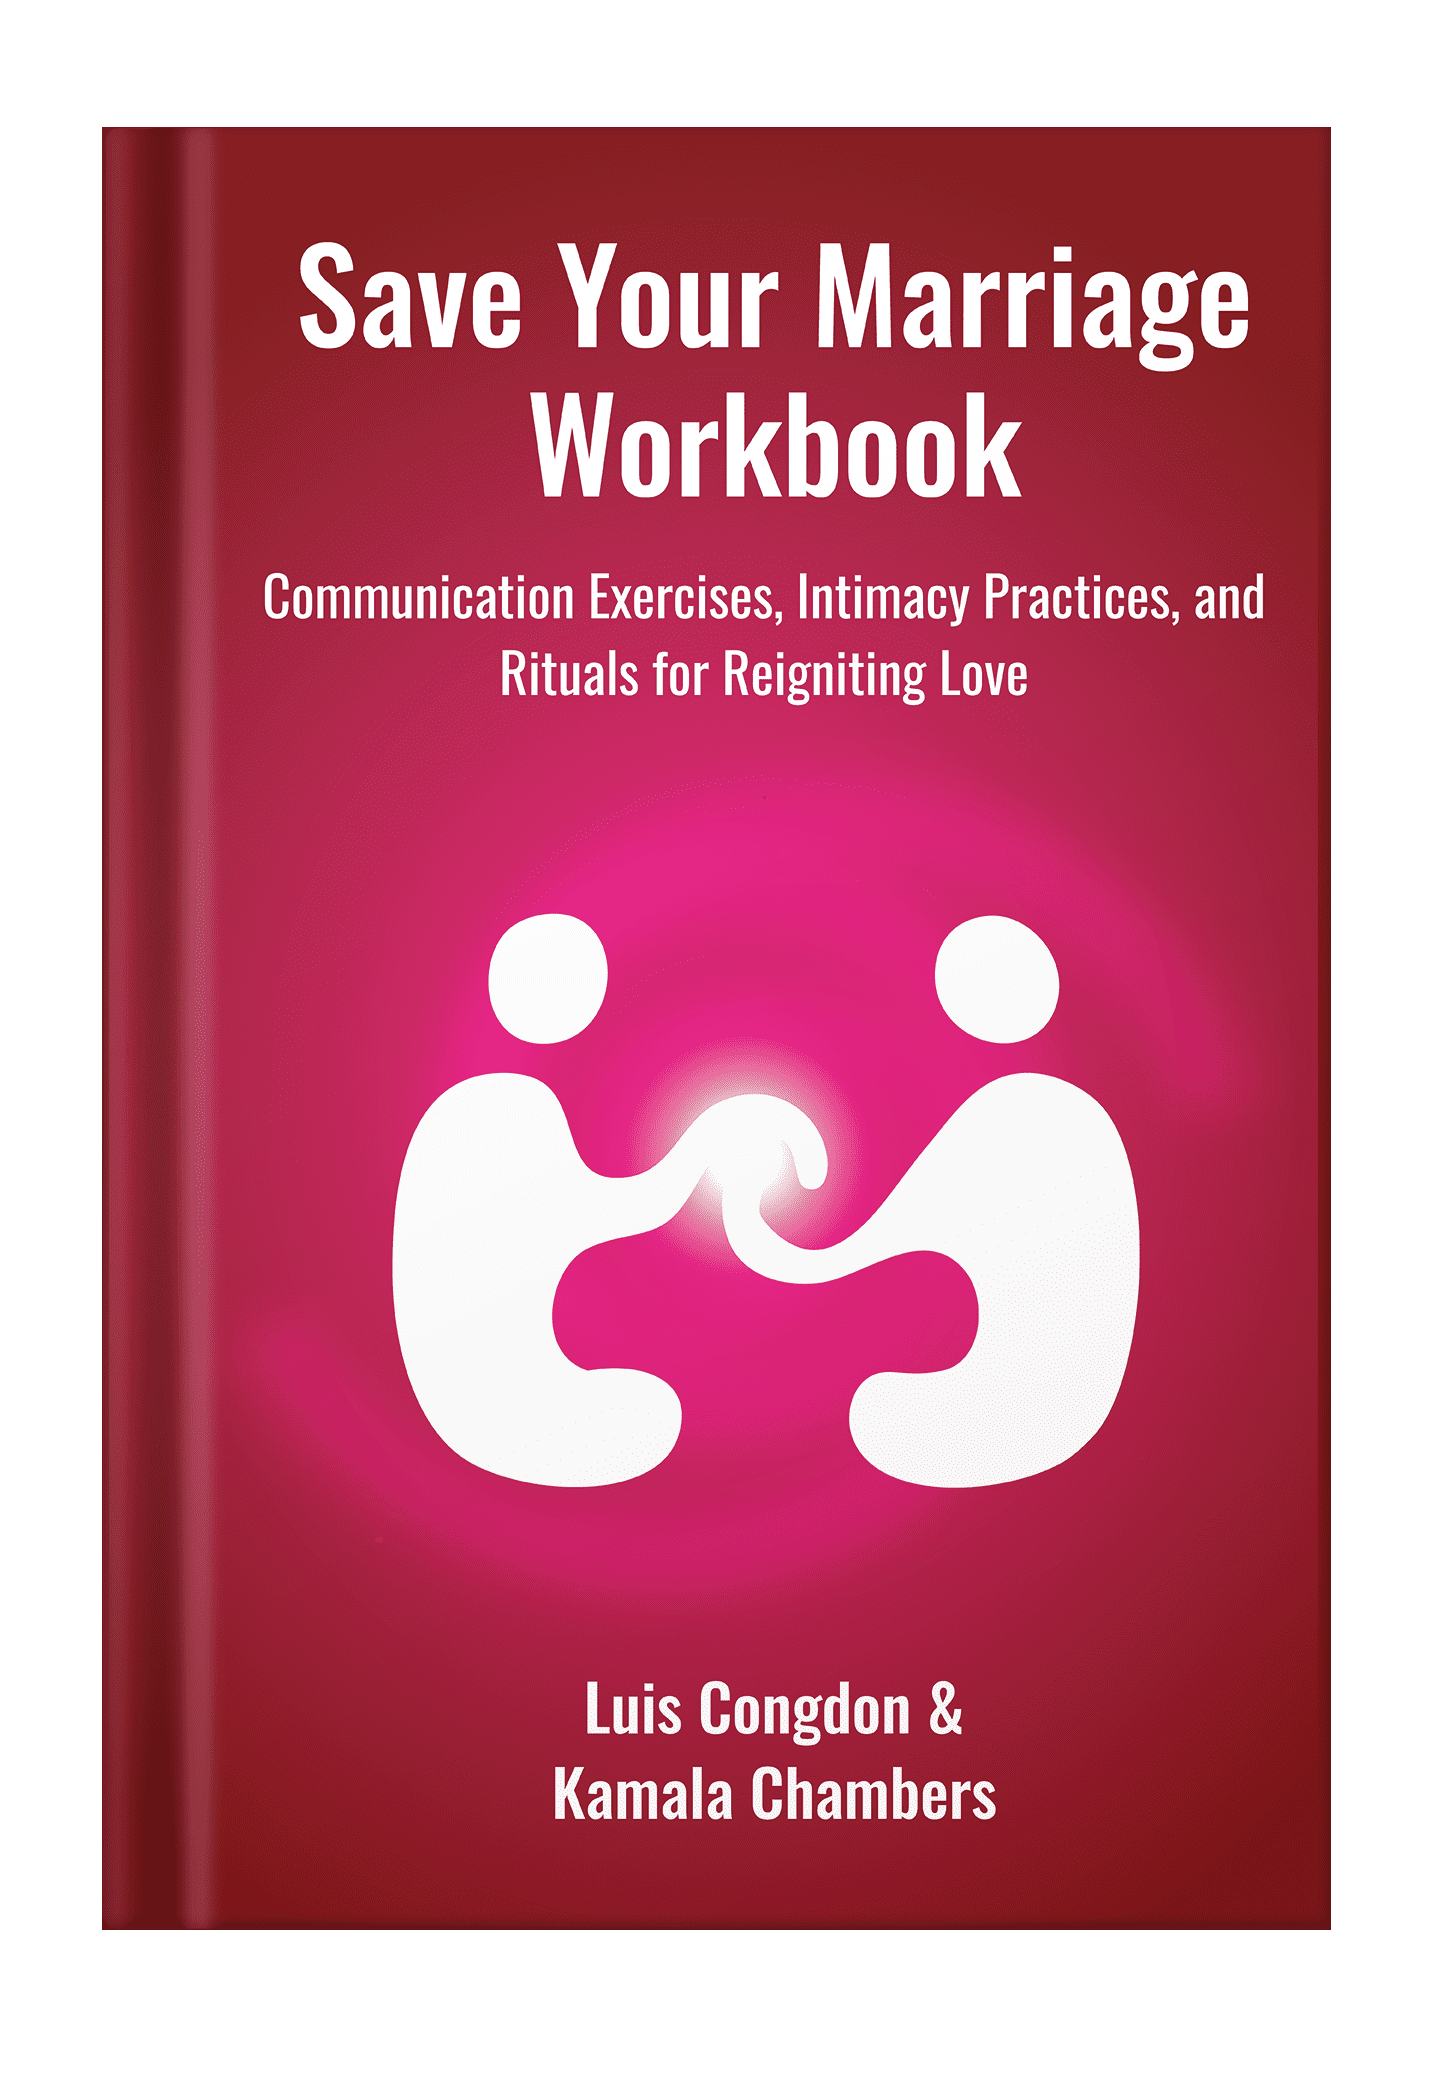 Save Your Marriage Workbook